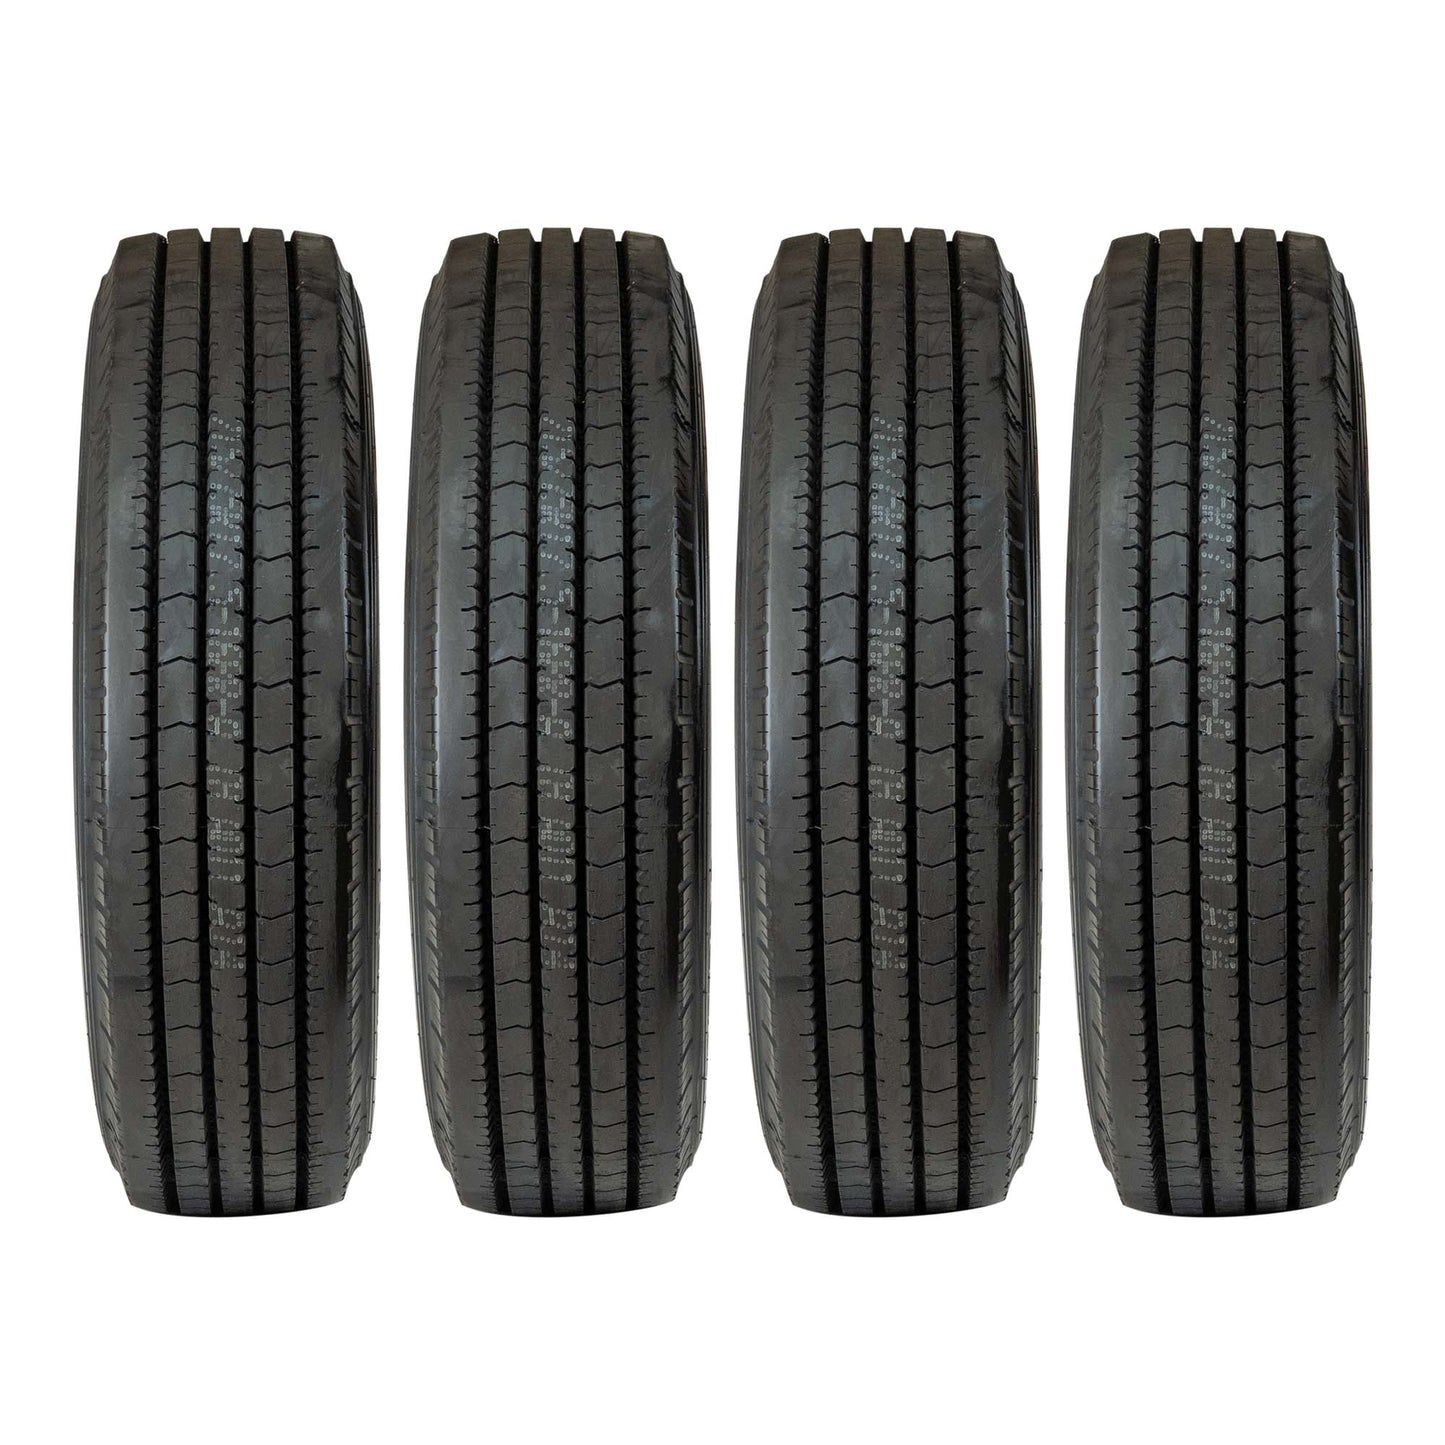 Goodride 215/75R17.5 16 Ply Trailer Tire - The Trailer Parts Outlet